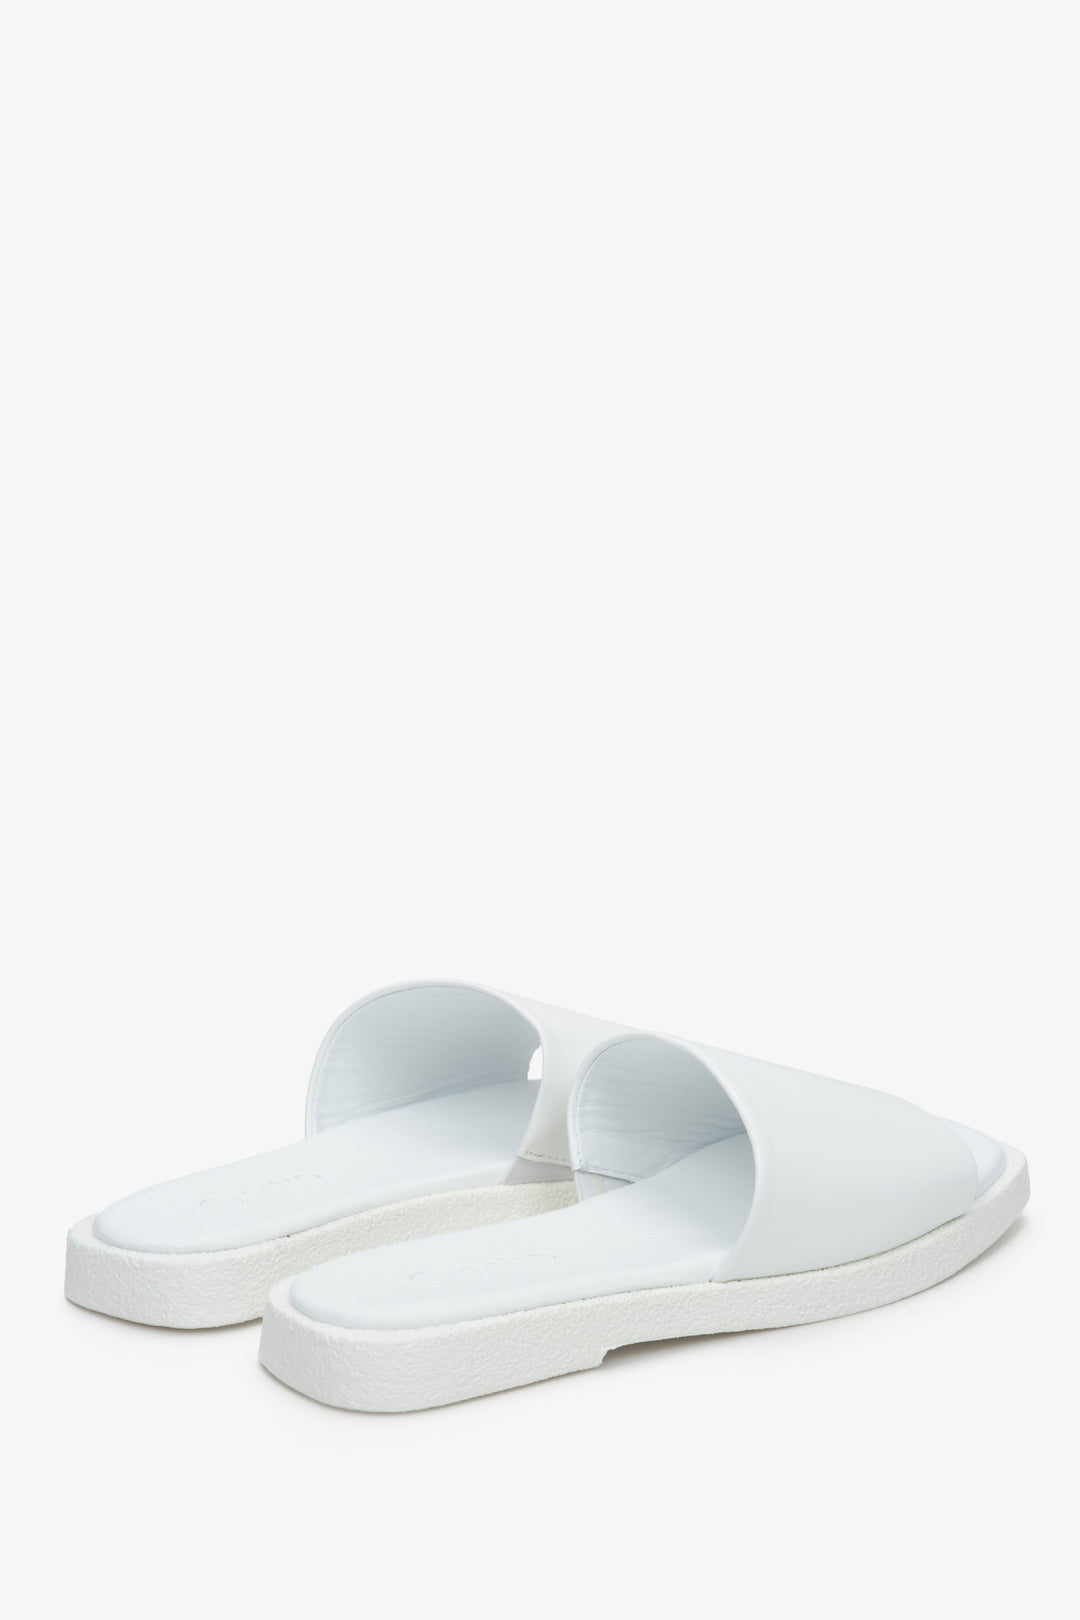 Women's white Estro flat slides made of natural leather.